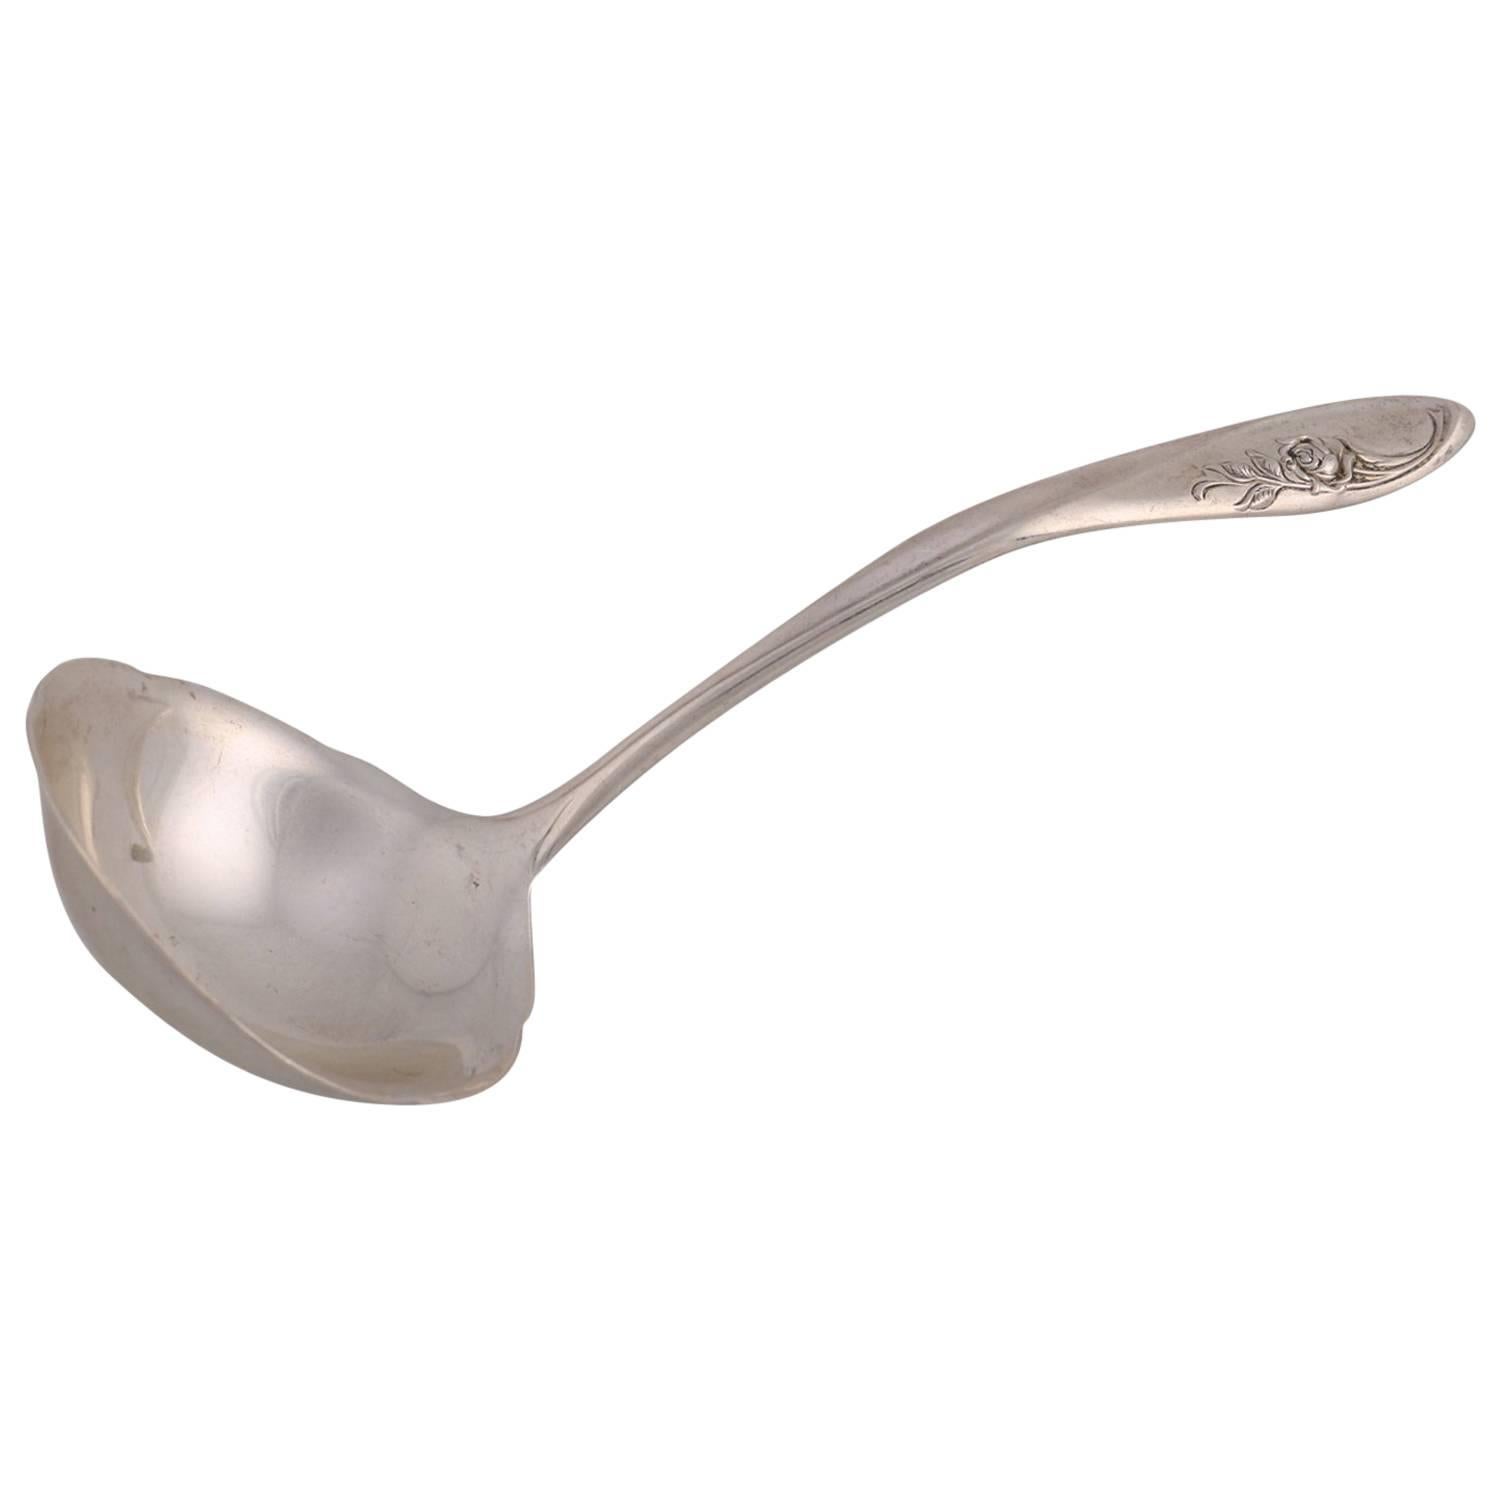 Vintage Sterling Silver Ladle by Towle, "Sculptured Rose", 1.8 Toz, 20th Century For Sale